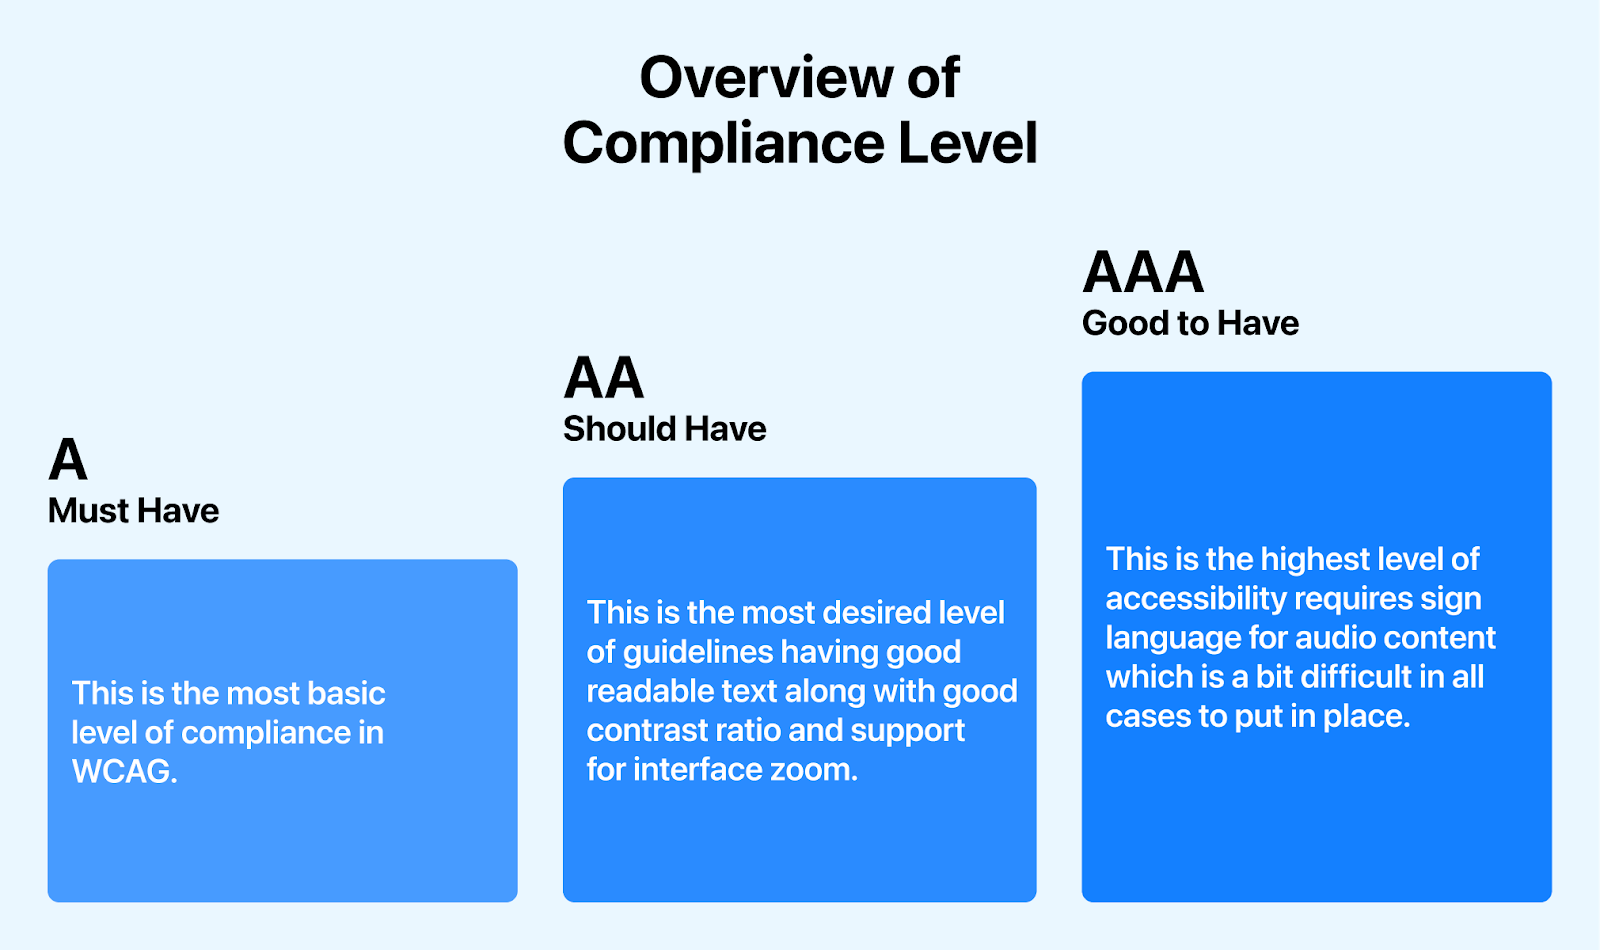 Structure of WCAG and Compliance Levels